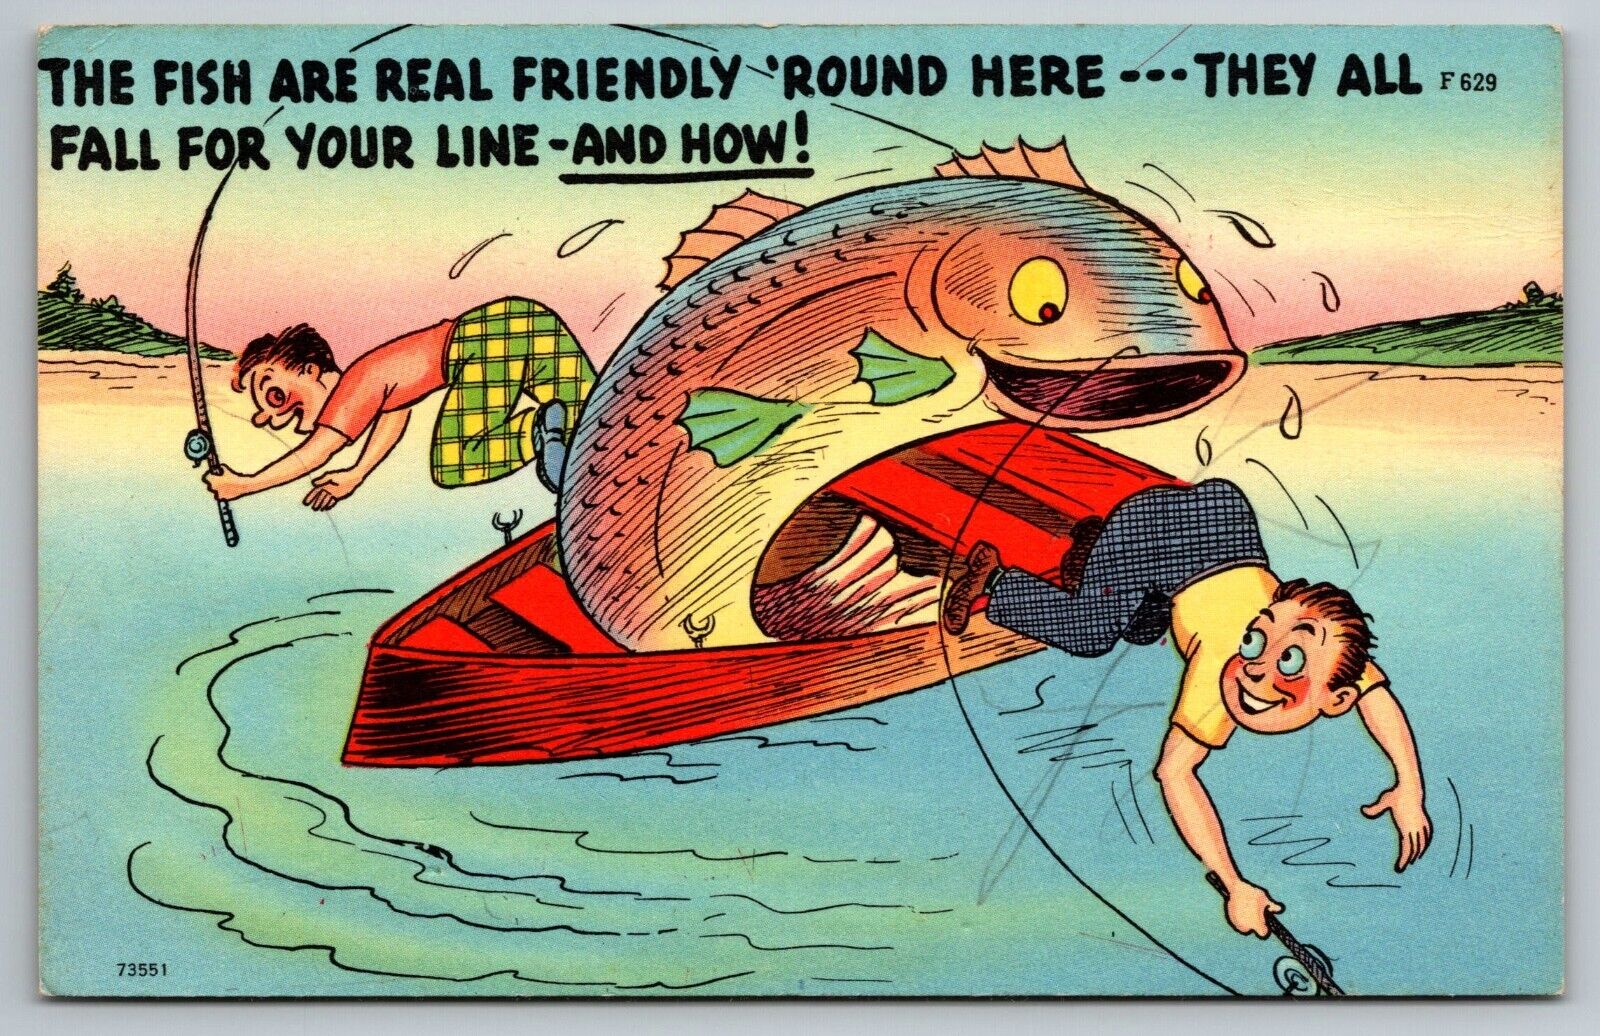 Fishing Comic Postcard Friendly fish fall for your line c1940s